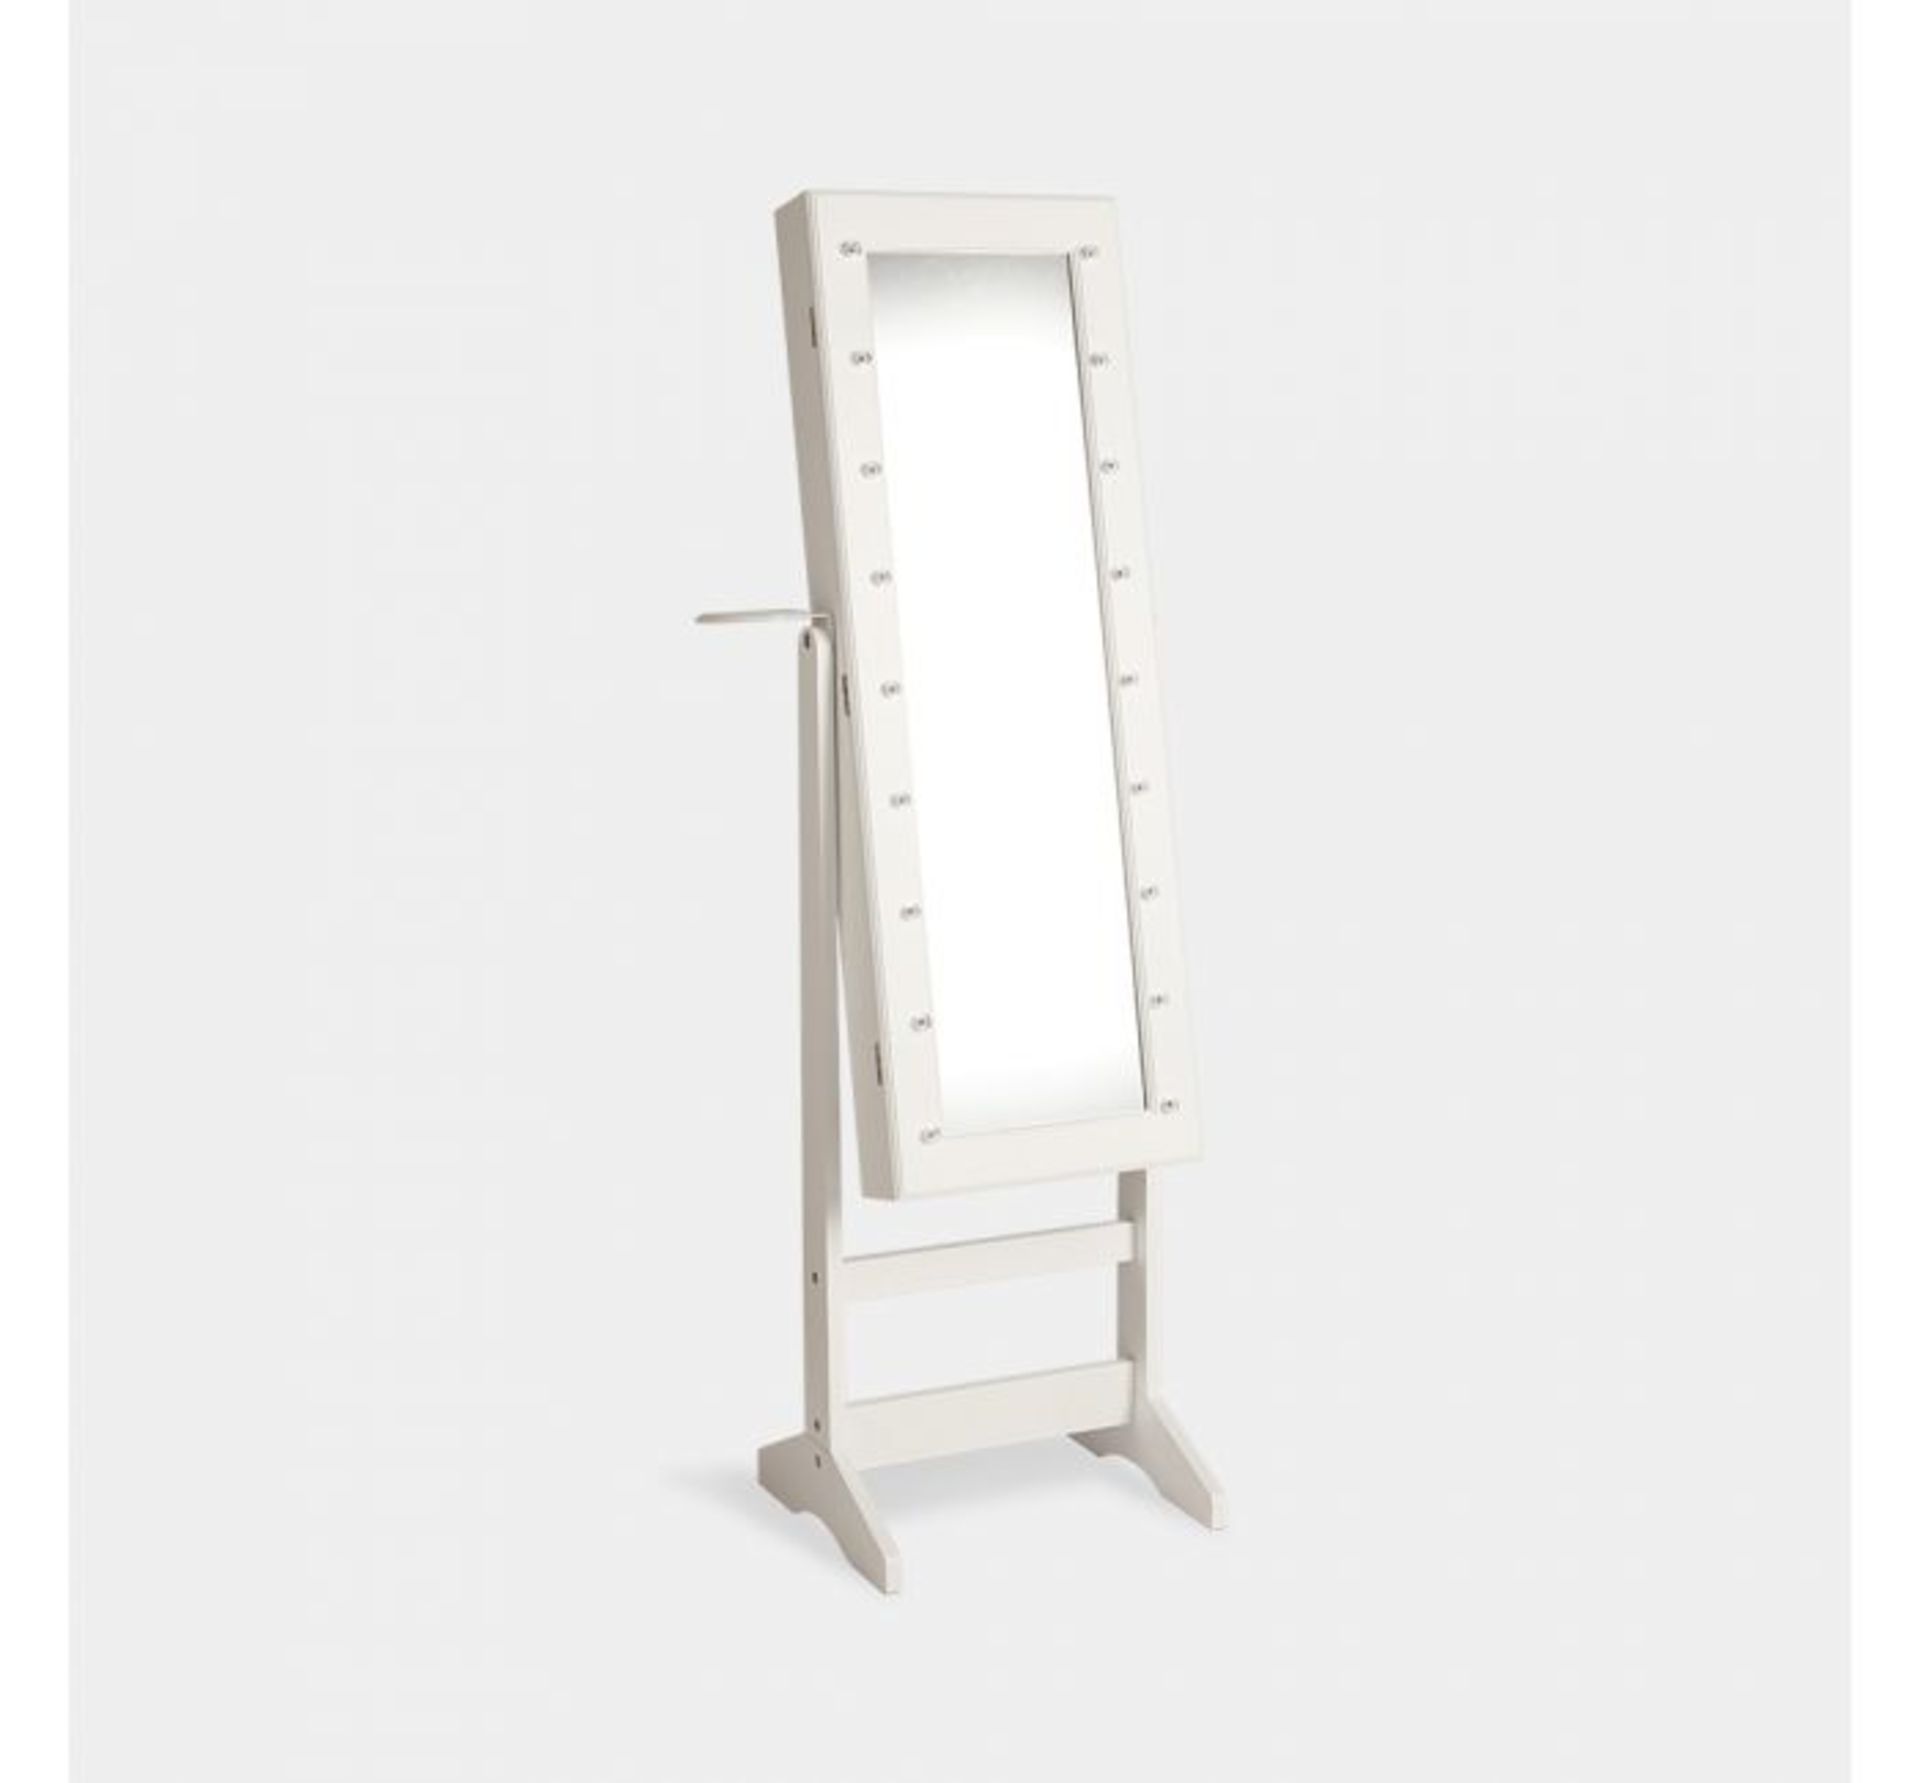 (JL11) White LED Armoire Storage Mirror Free standing mirror and jewellery cabinet holds up to... - Image 3 of 4